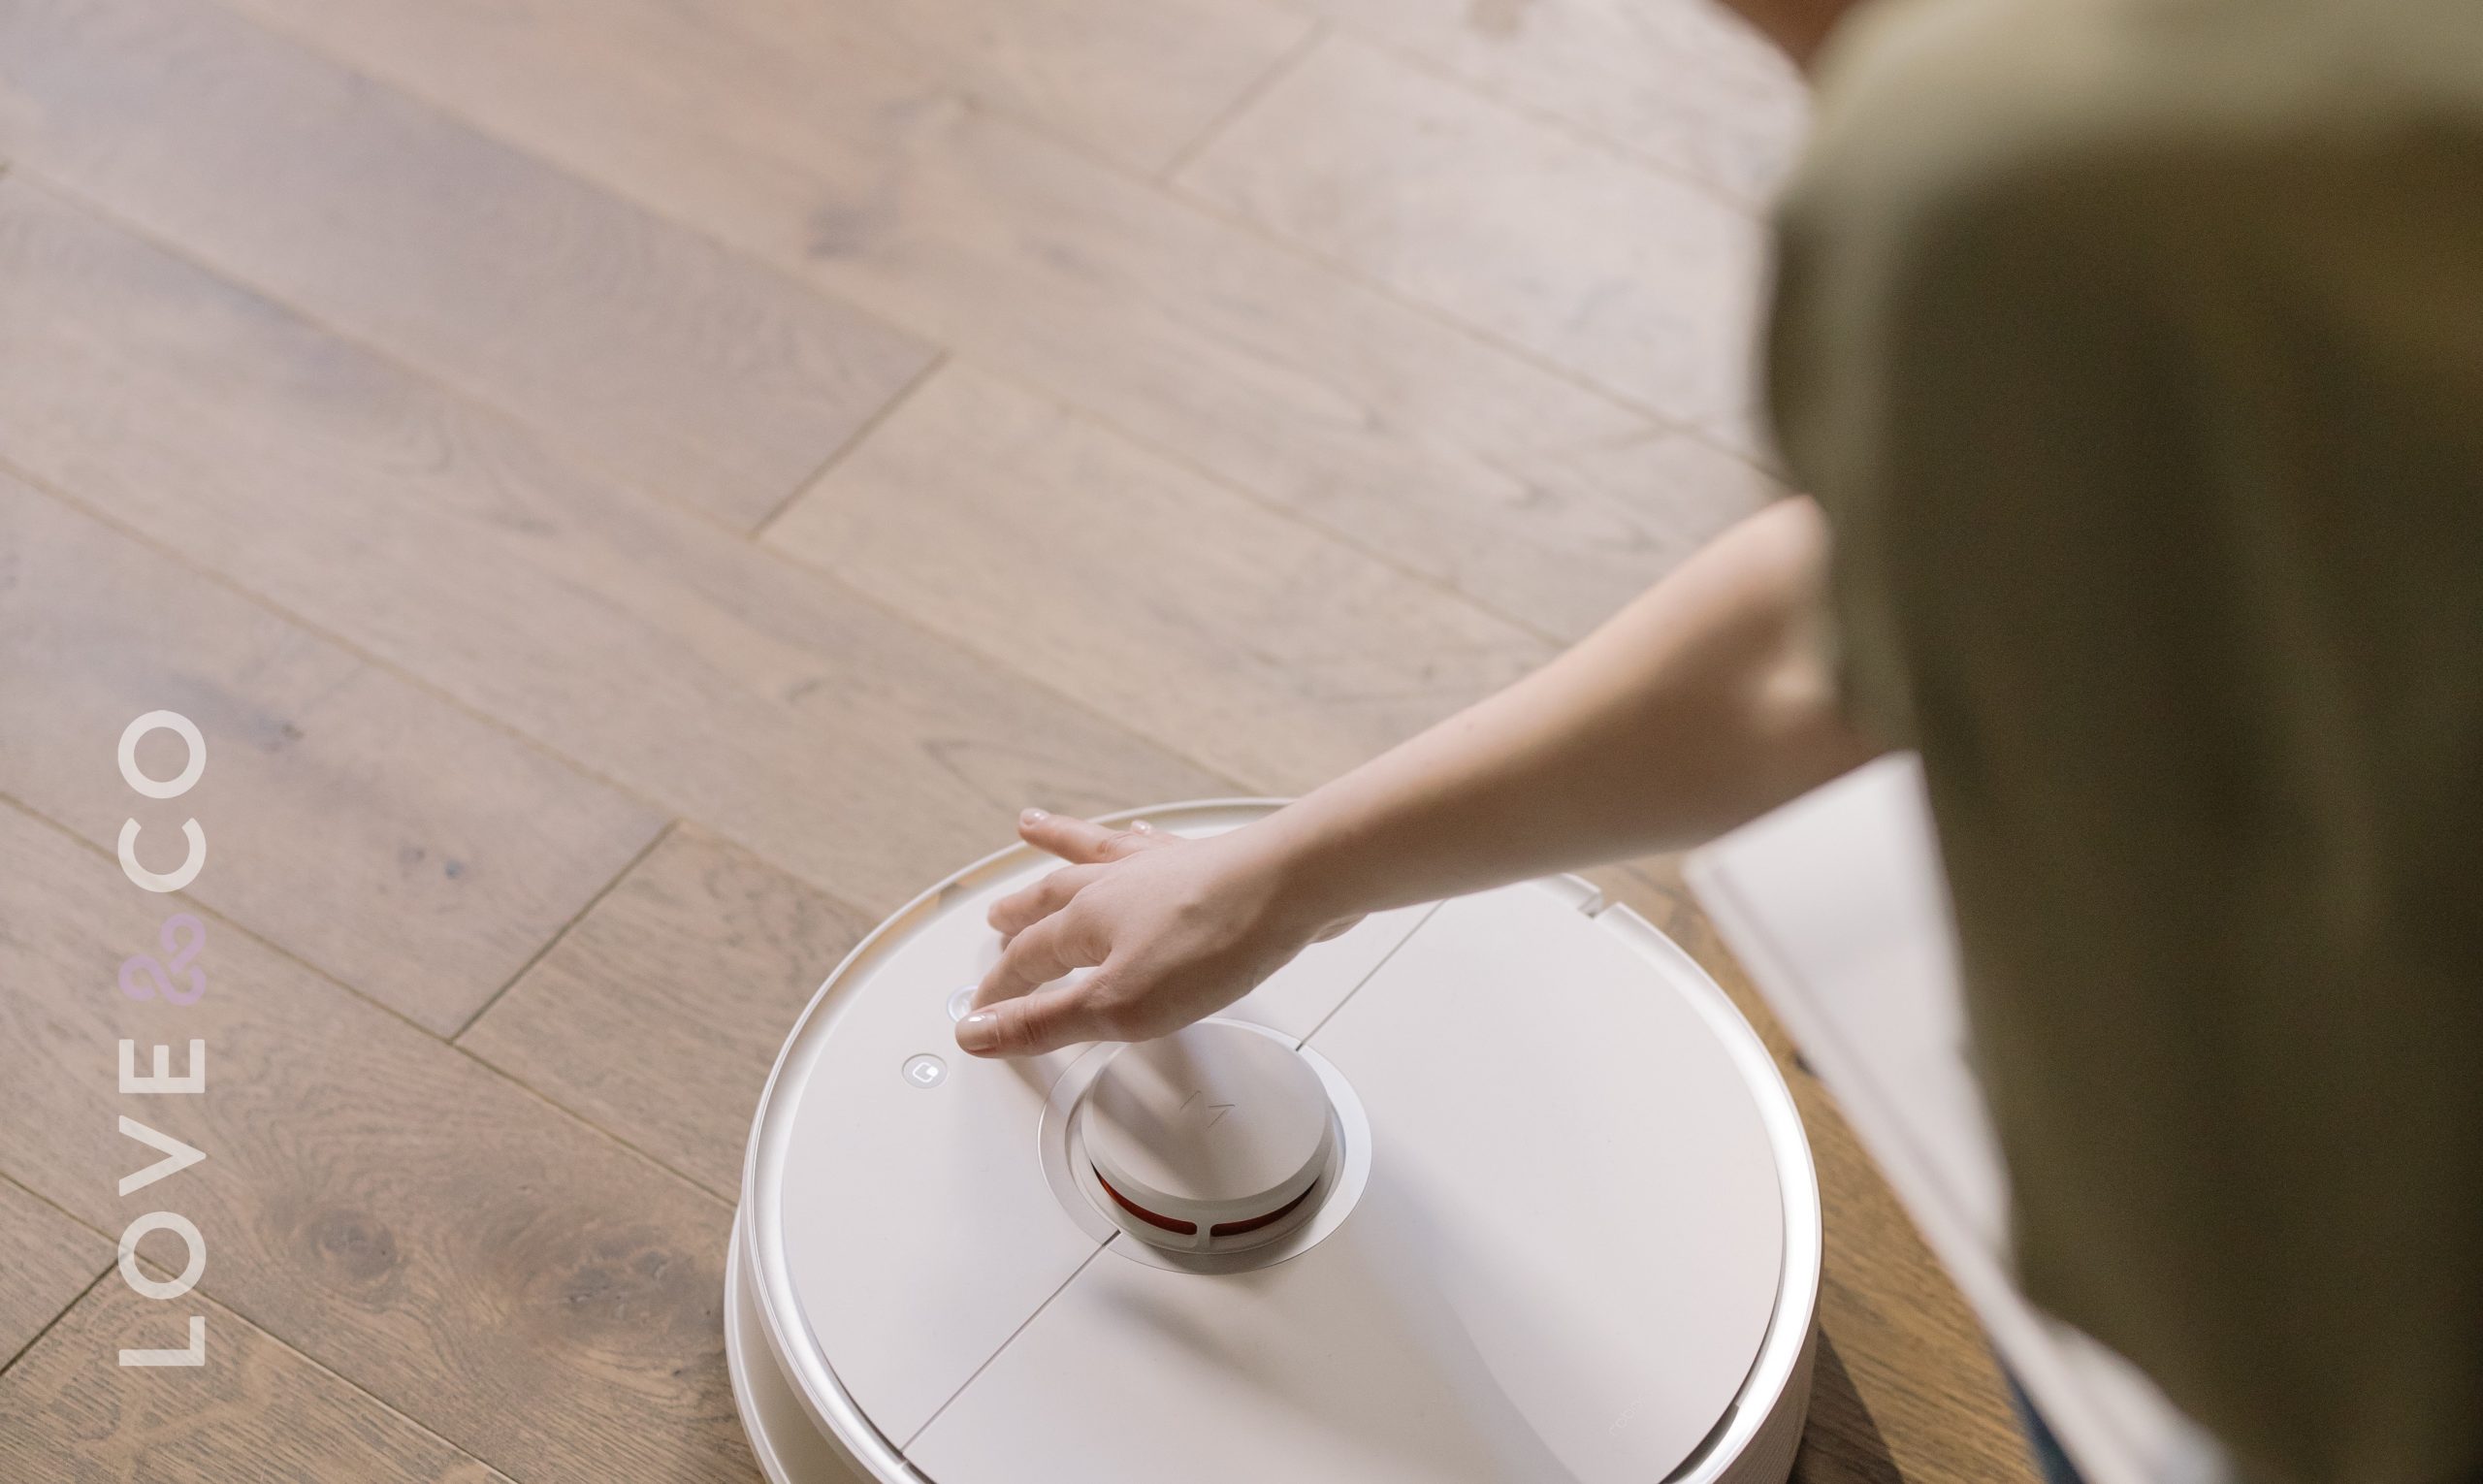 Robot Vacuums - Are They Worth the Hype?